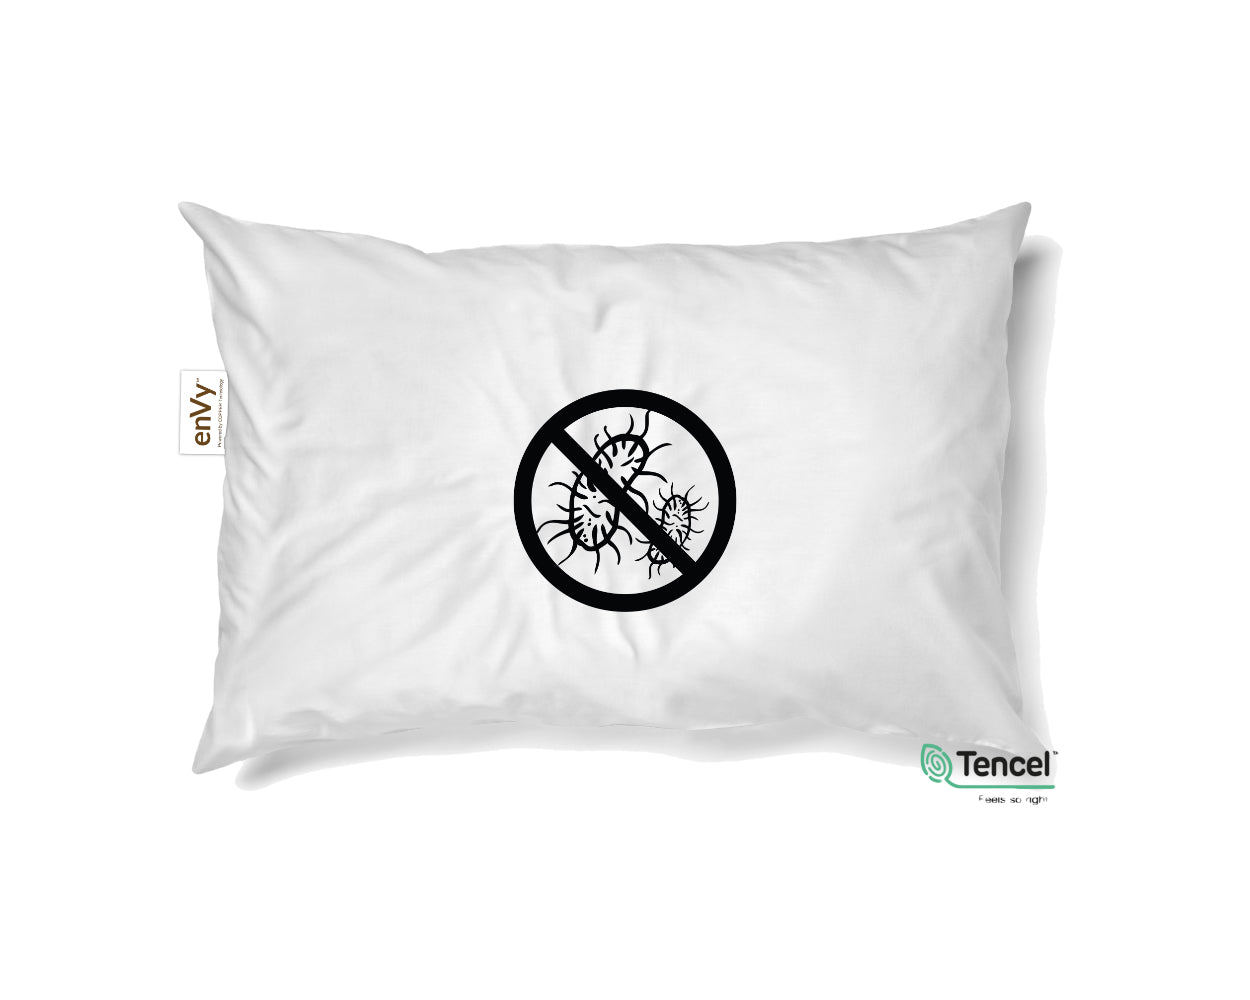 The COPPER Pillow Slip by enVy® (Pillow Protector)